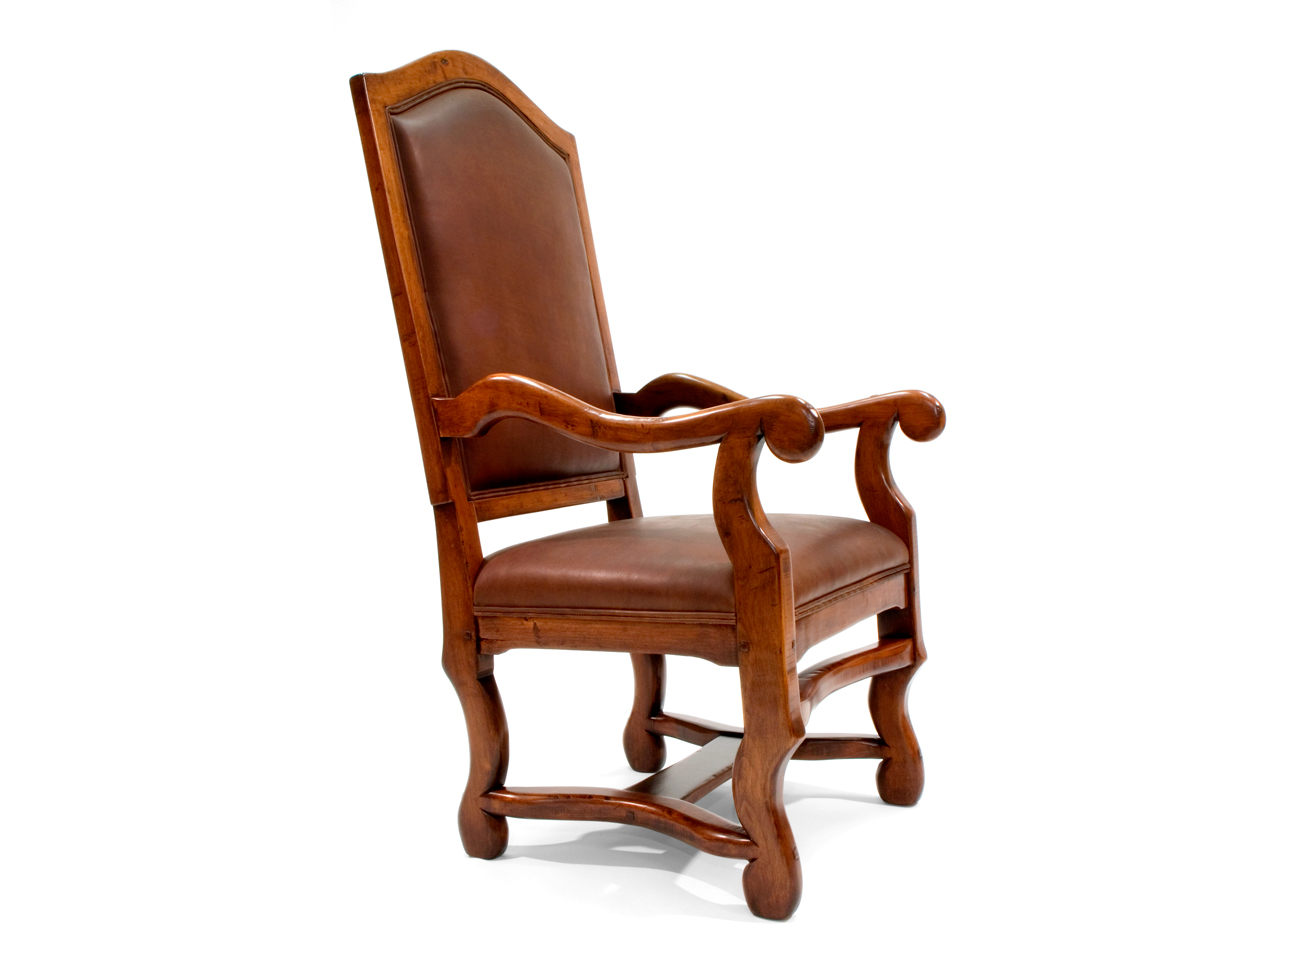 Robert-Seliger-Languedoc-Leather-Chair-side